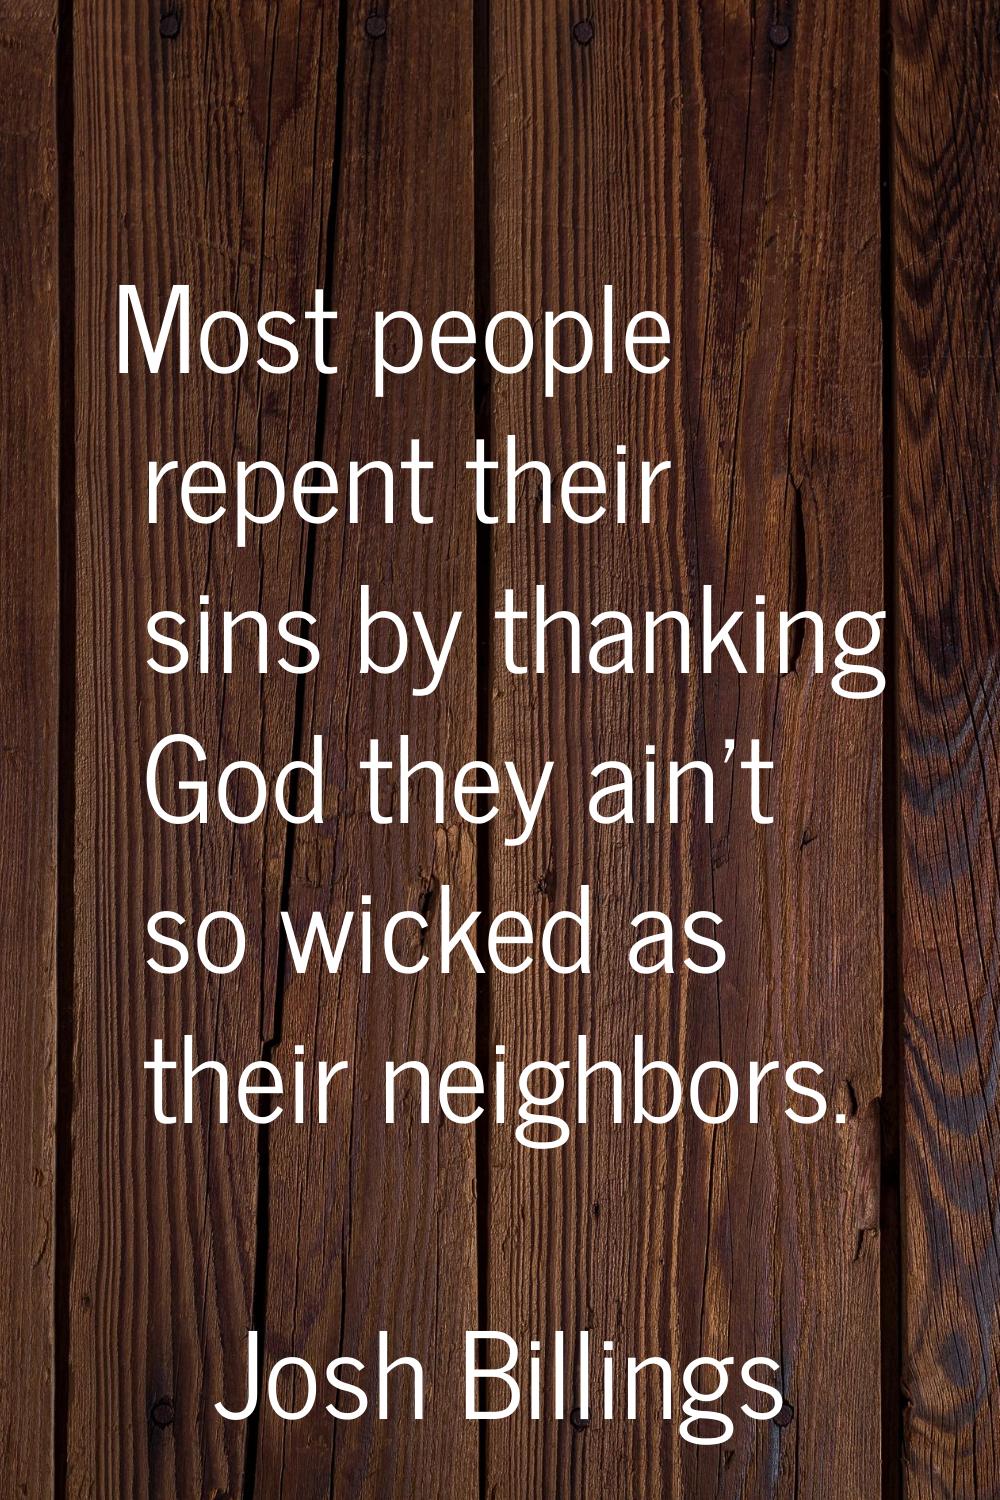 Most people repent their sins by thanking God they ain't so wicked as their neighbors.